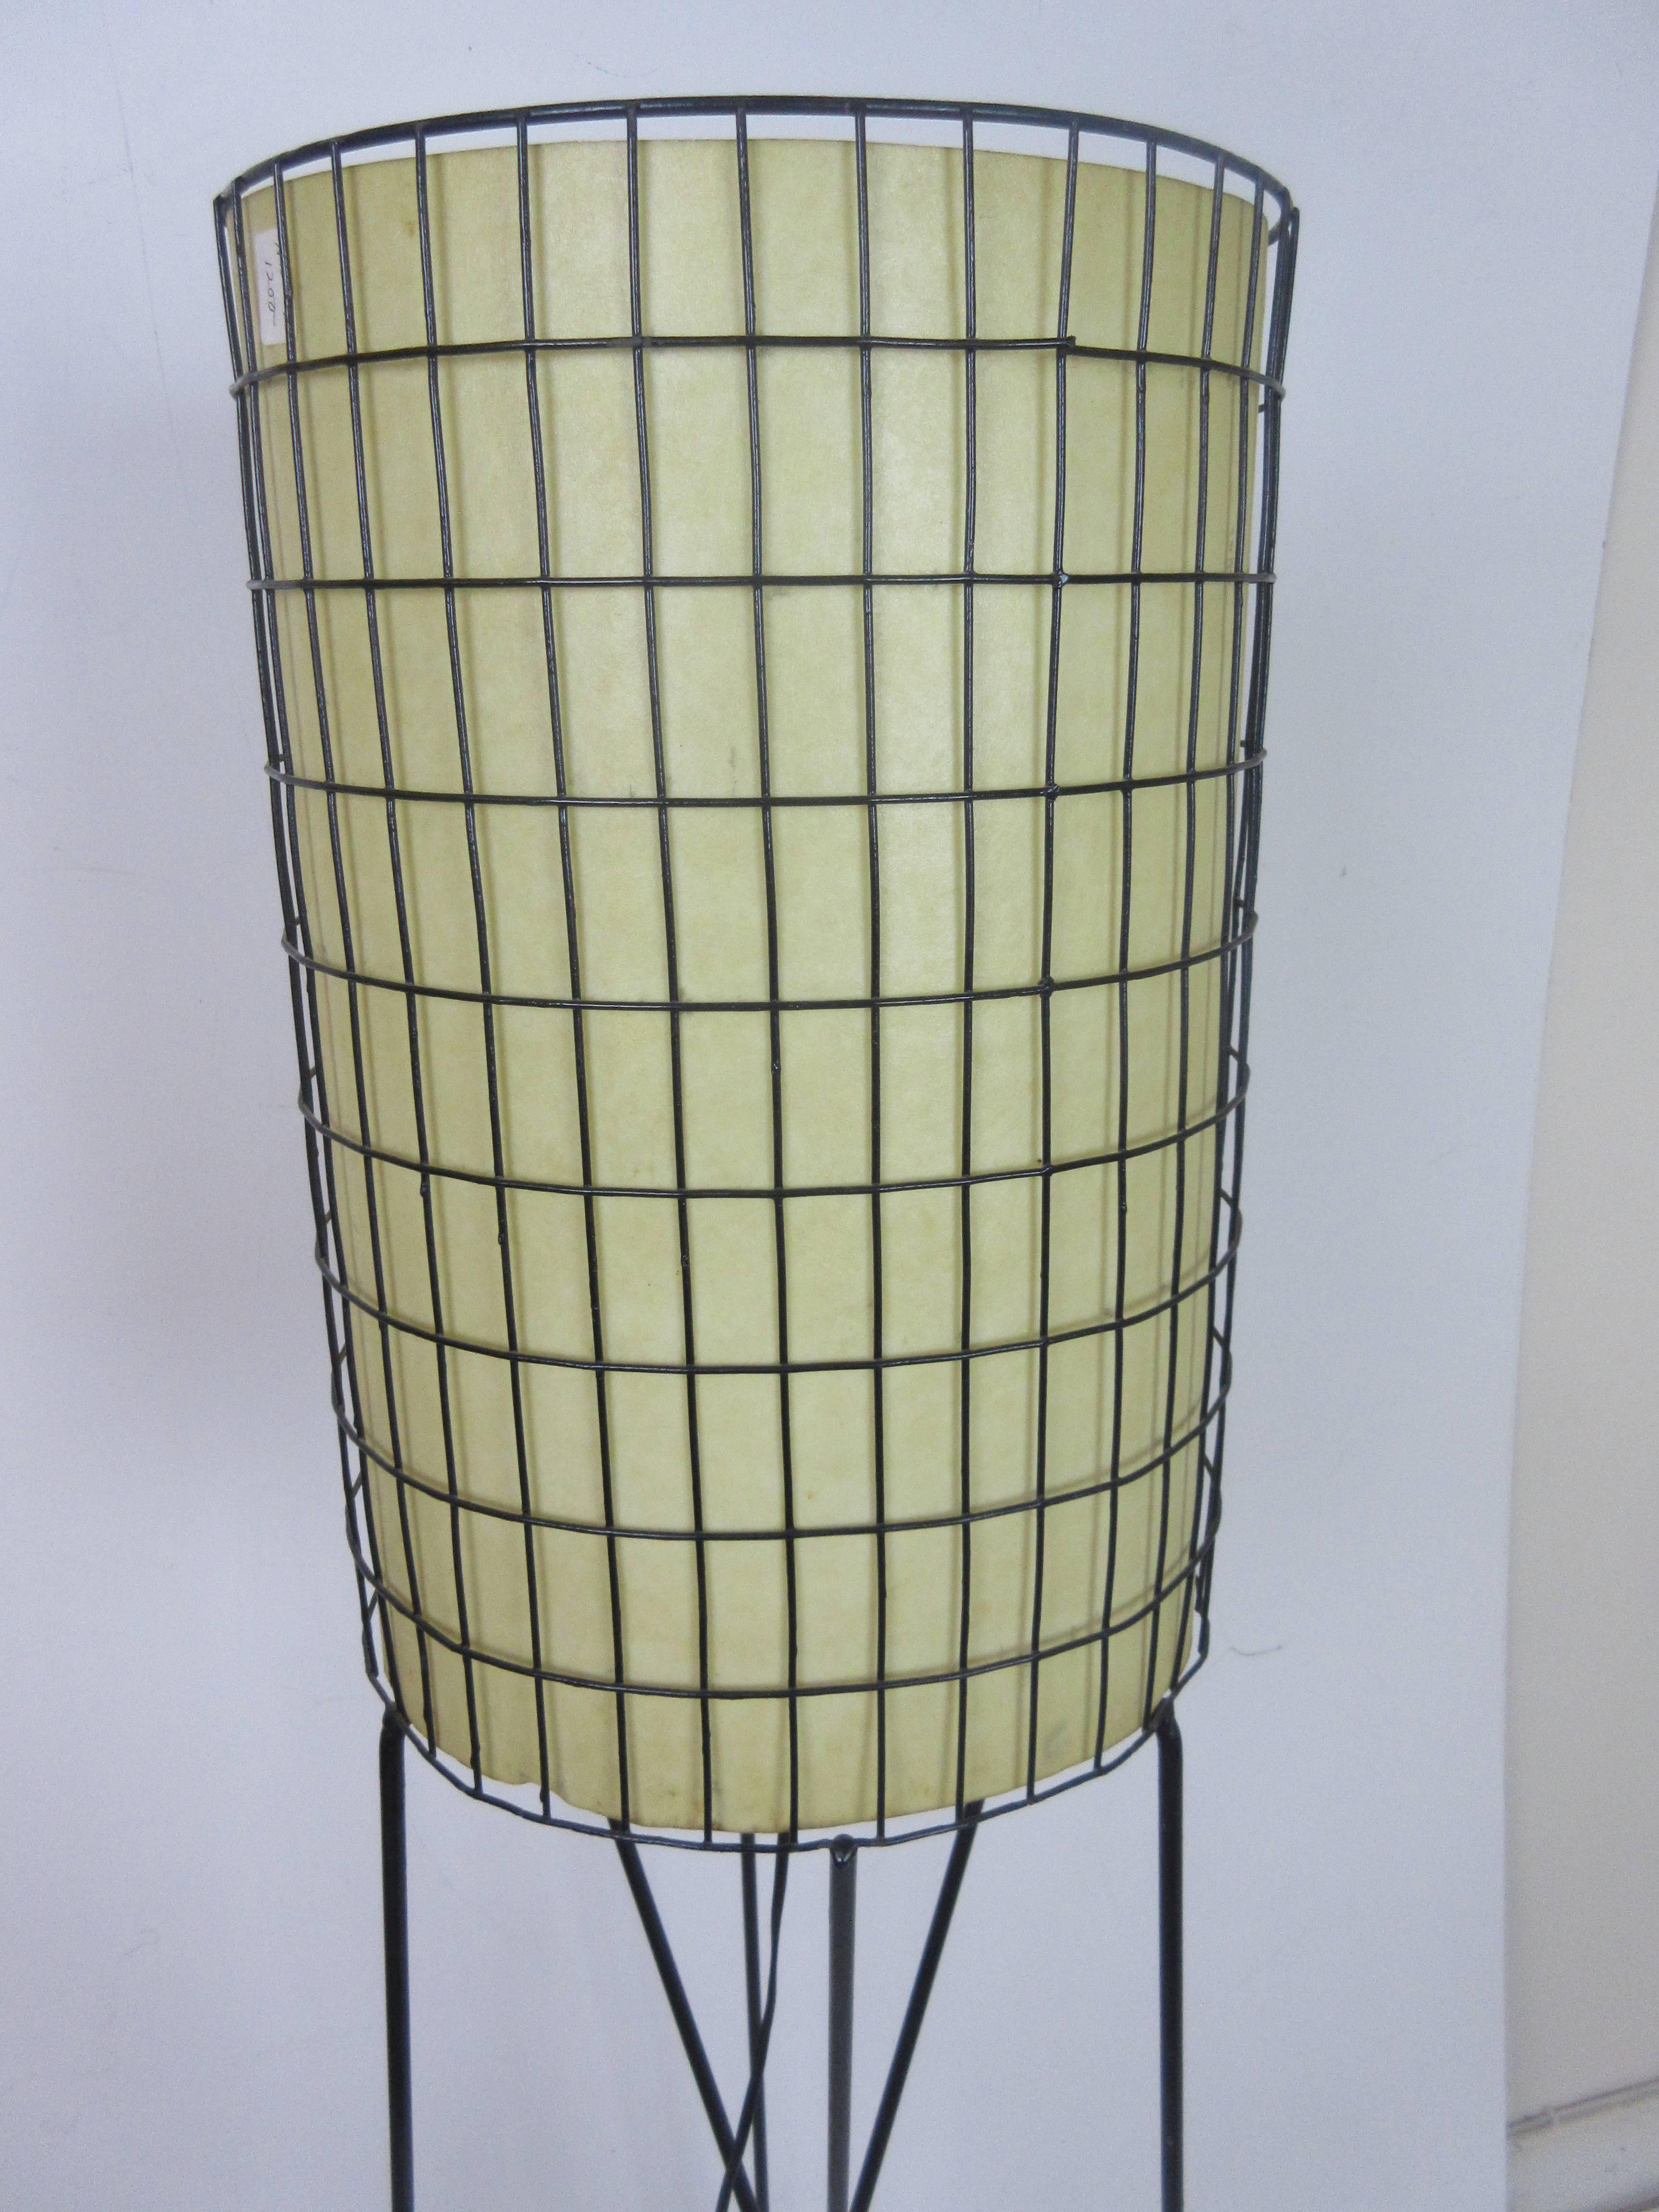 Paul Mayen lamp in wrought iron with fiberglass shade. Hair pin legs support this fret work cylinder lined in fiberglass to shield the light source. One of Mayen's early successful low cost designs.